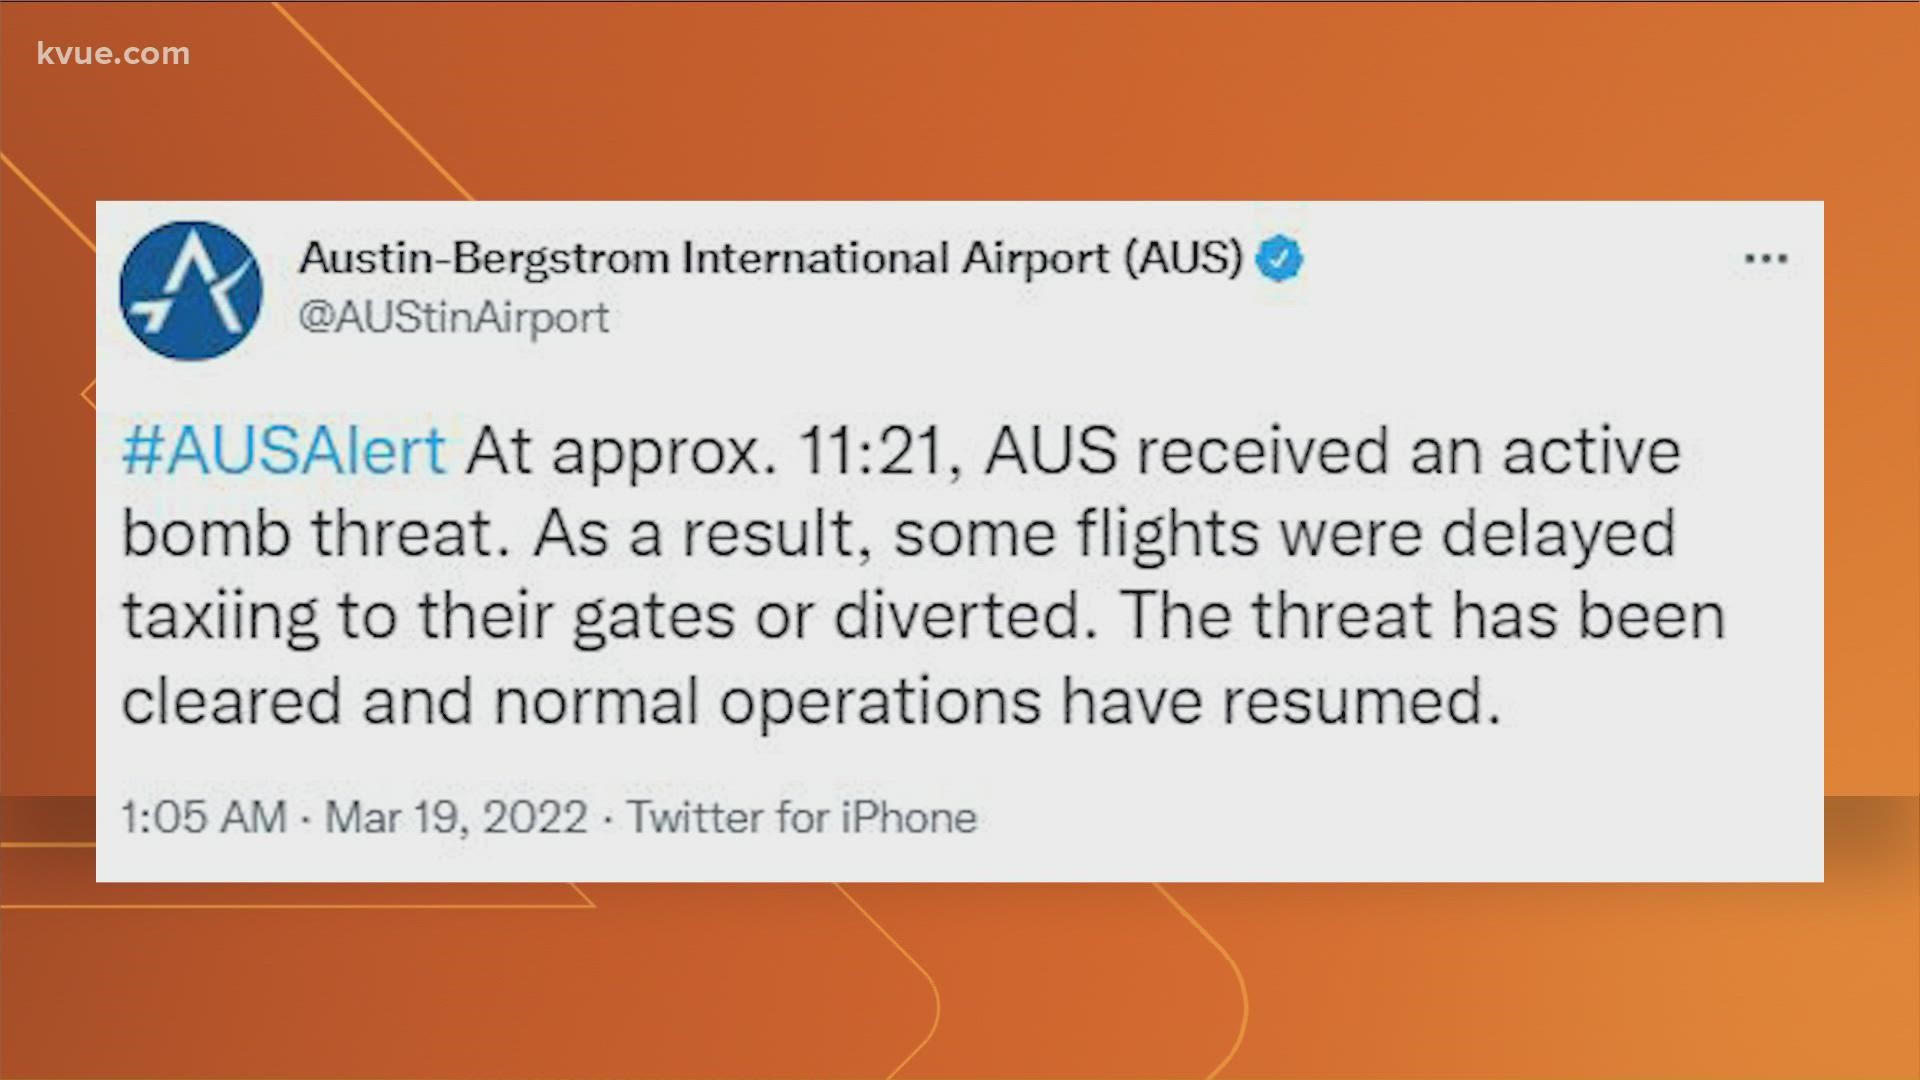 Operations are now back to normal at Austin-Bergstrom International Airport.